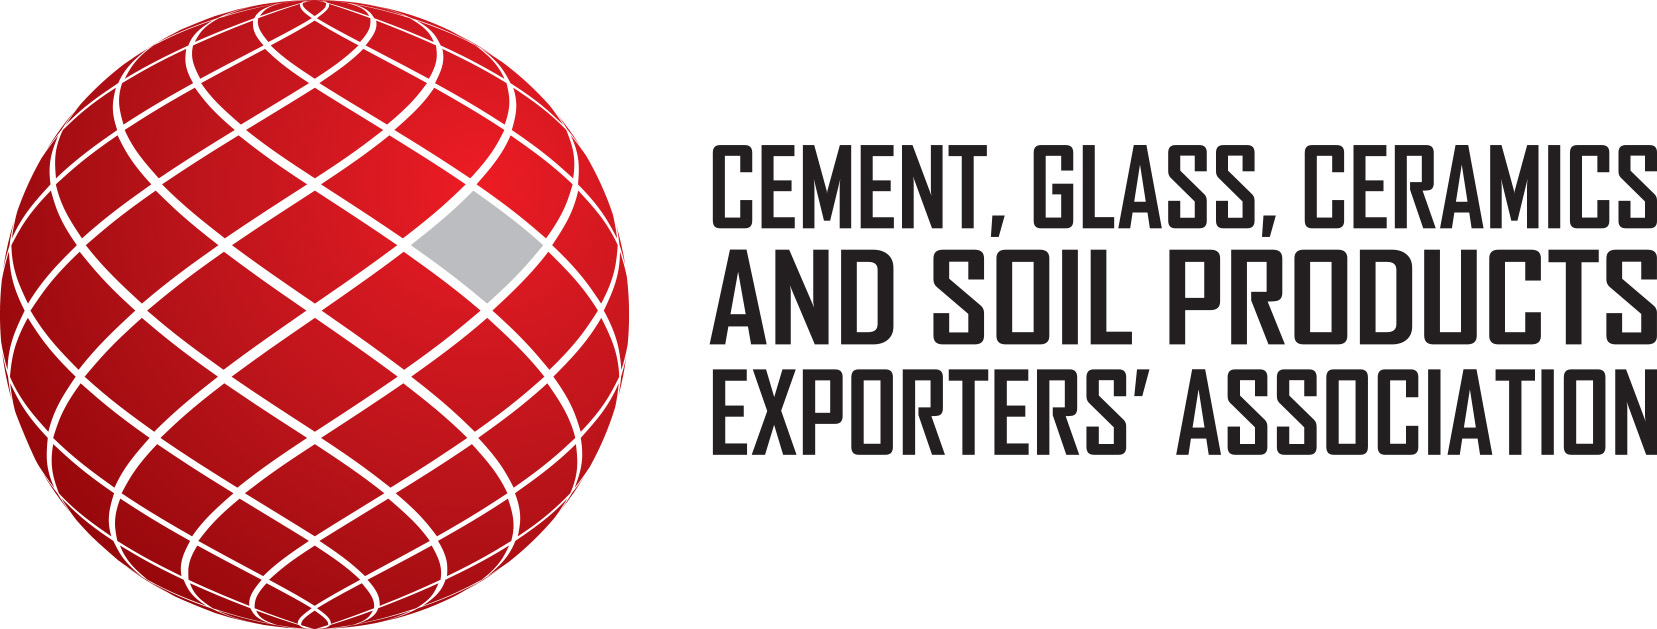 Cement, Glass, Ceramics and Soil Products Exporters' Association Logo